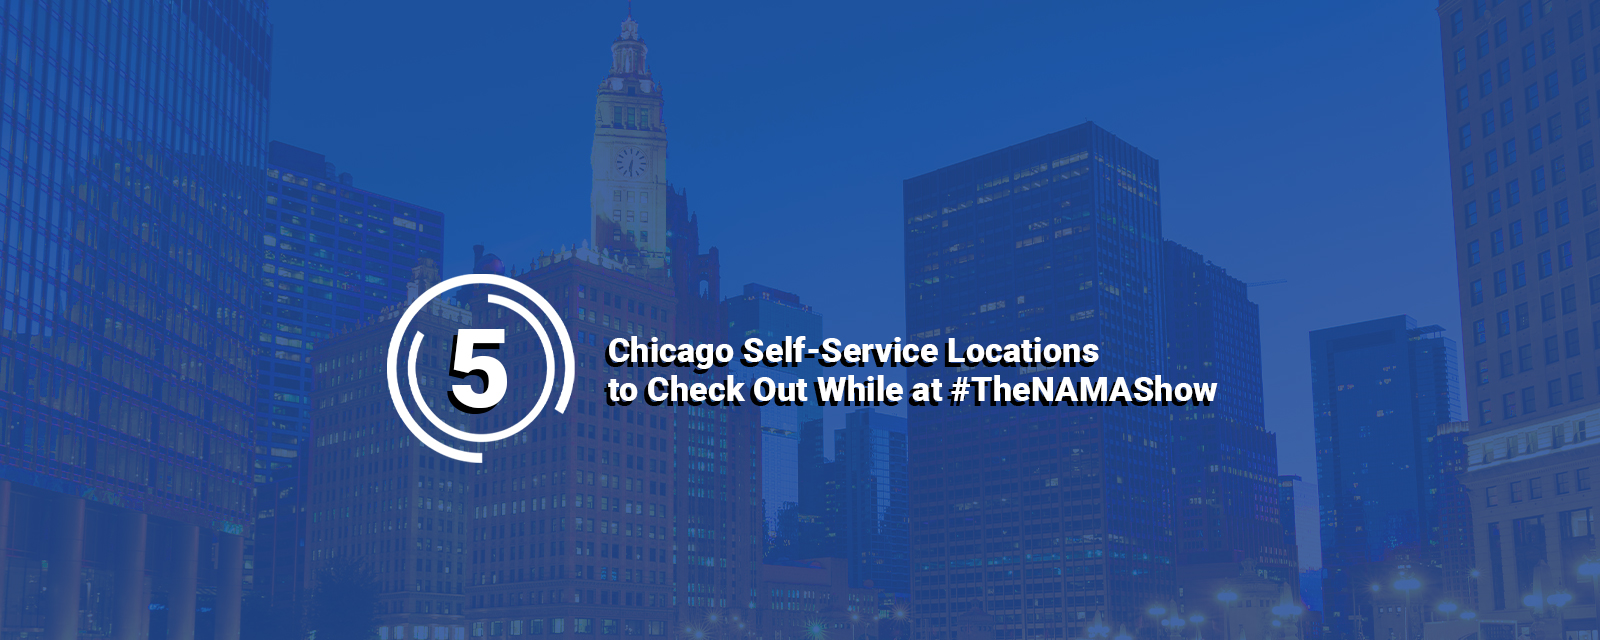 5-Chicago-Self-Service-Locations-to-Check-Out-While-at-TheNAMAShow